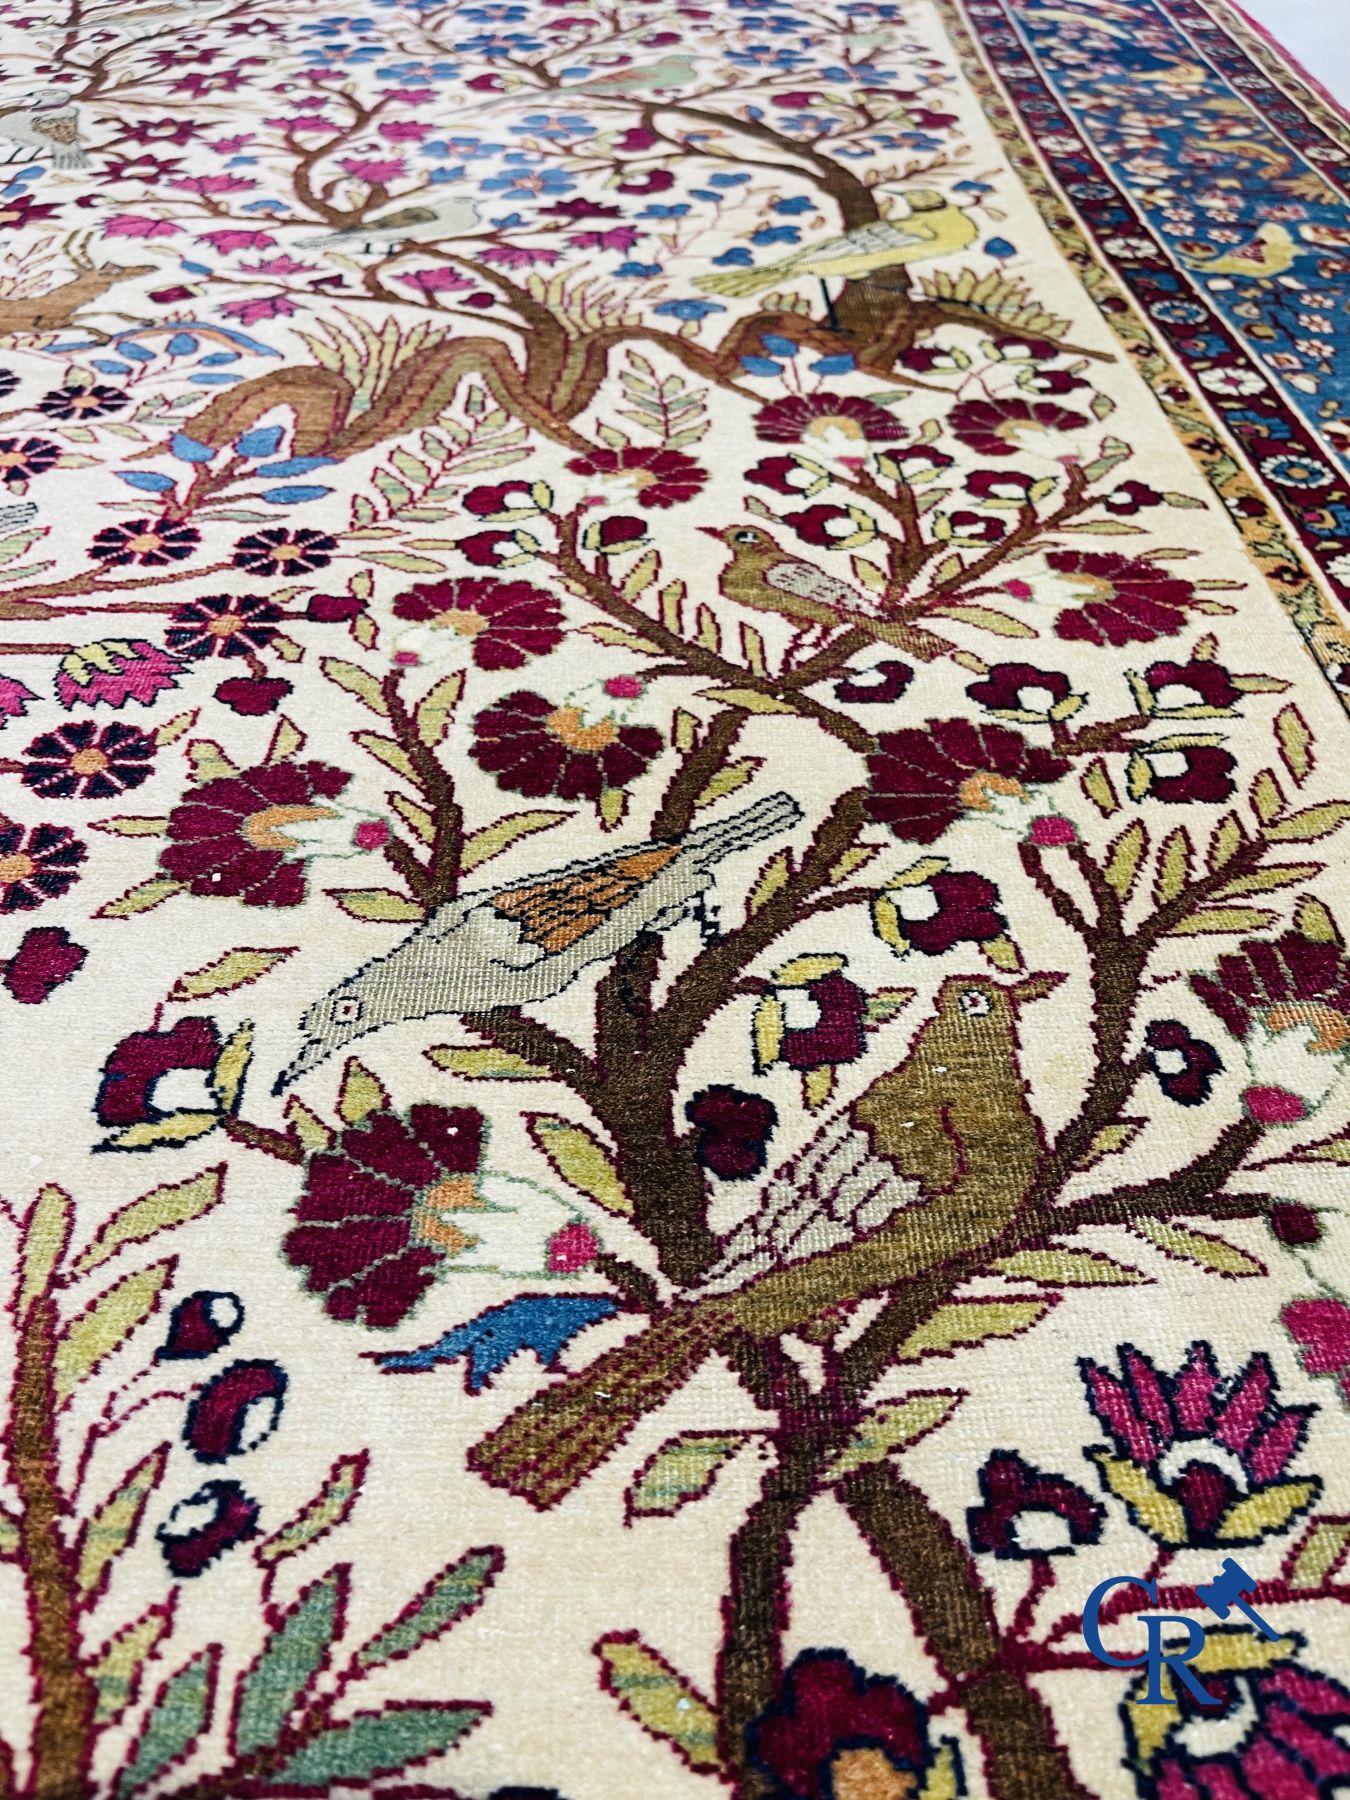 Oriental carpets: Antique oriental carpet with a decor of animals and birds in the forest. - Image 8 of 10